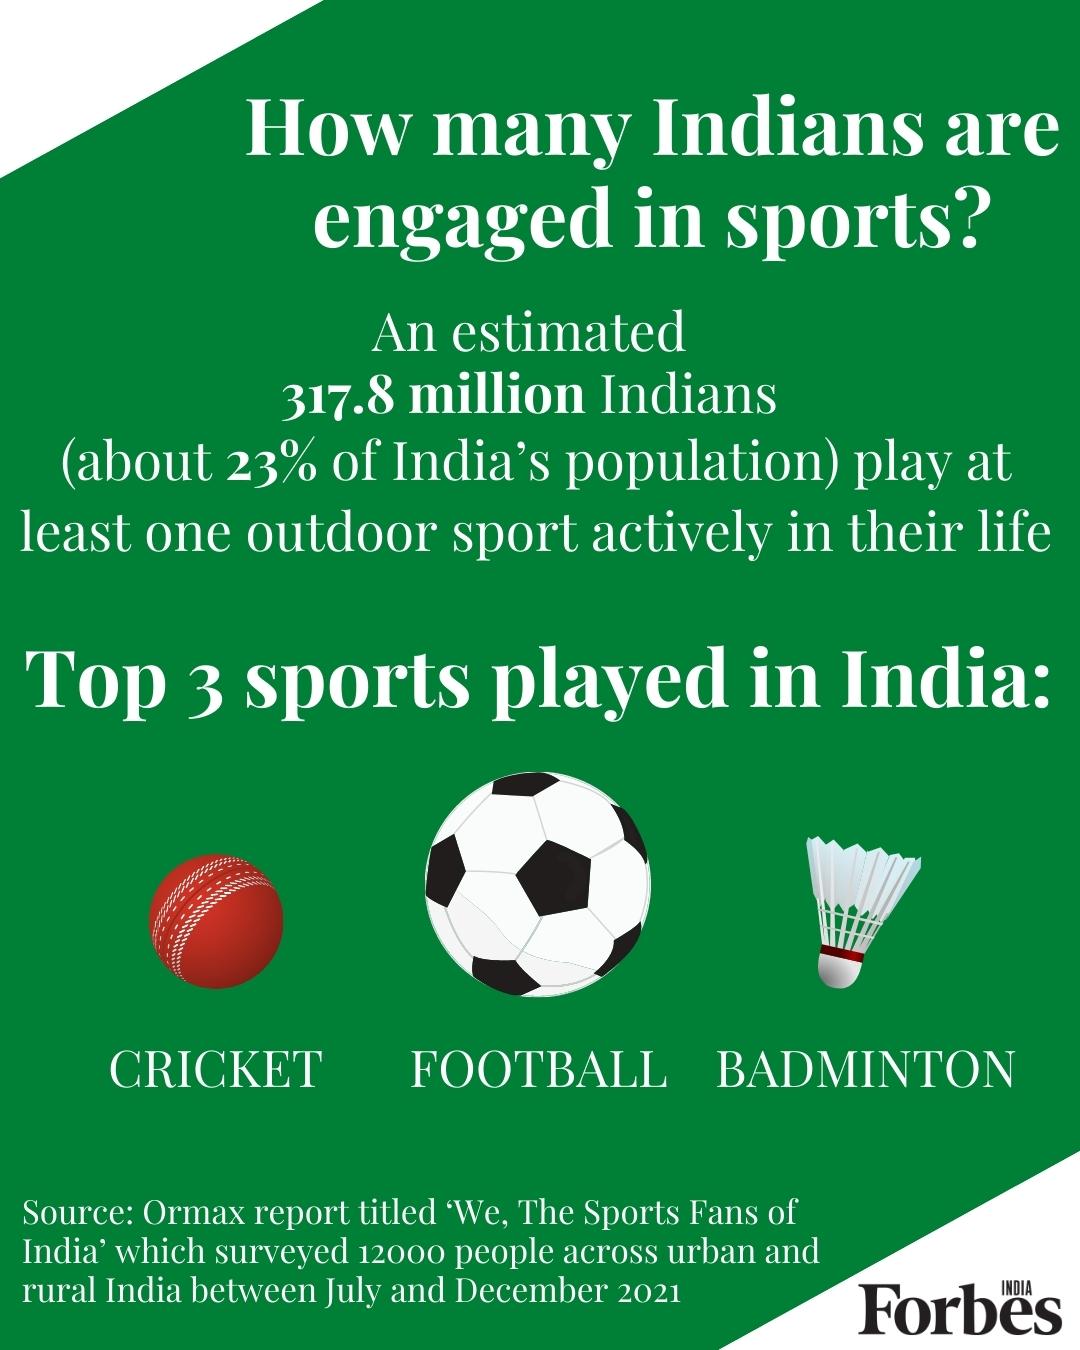 India and its tryst with sports, in numbers